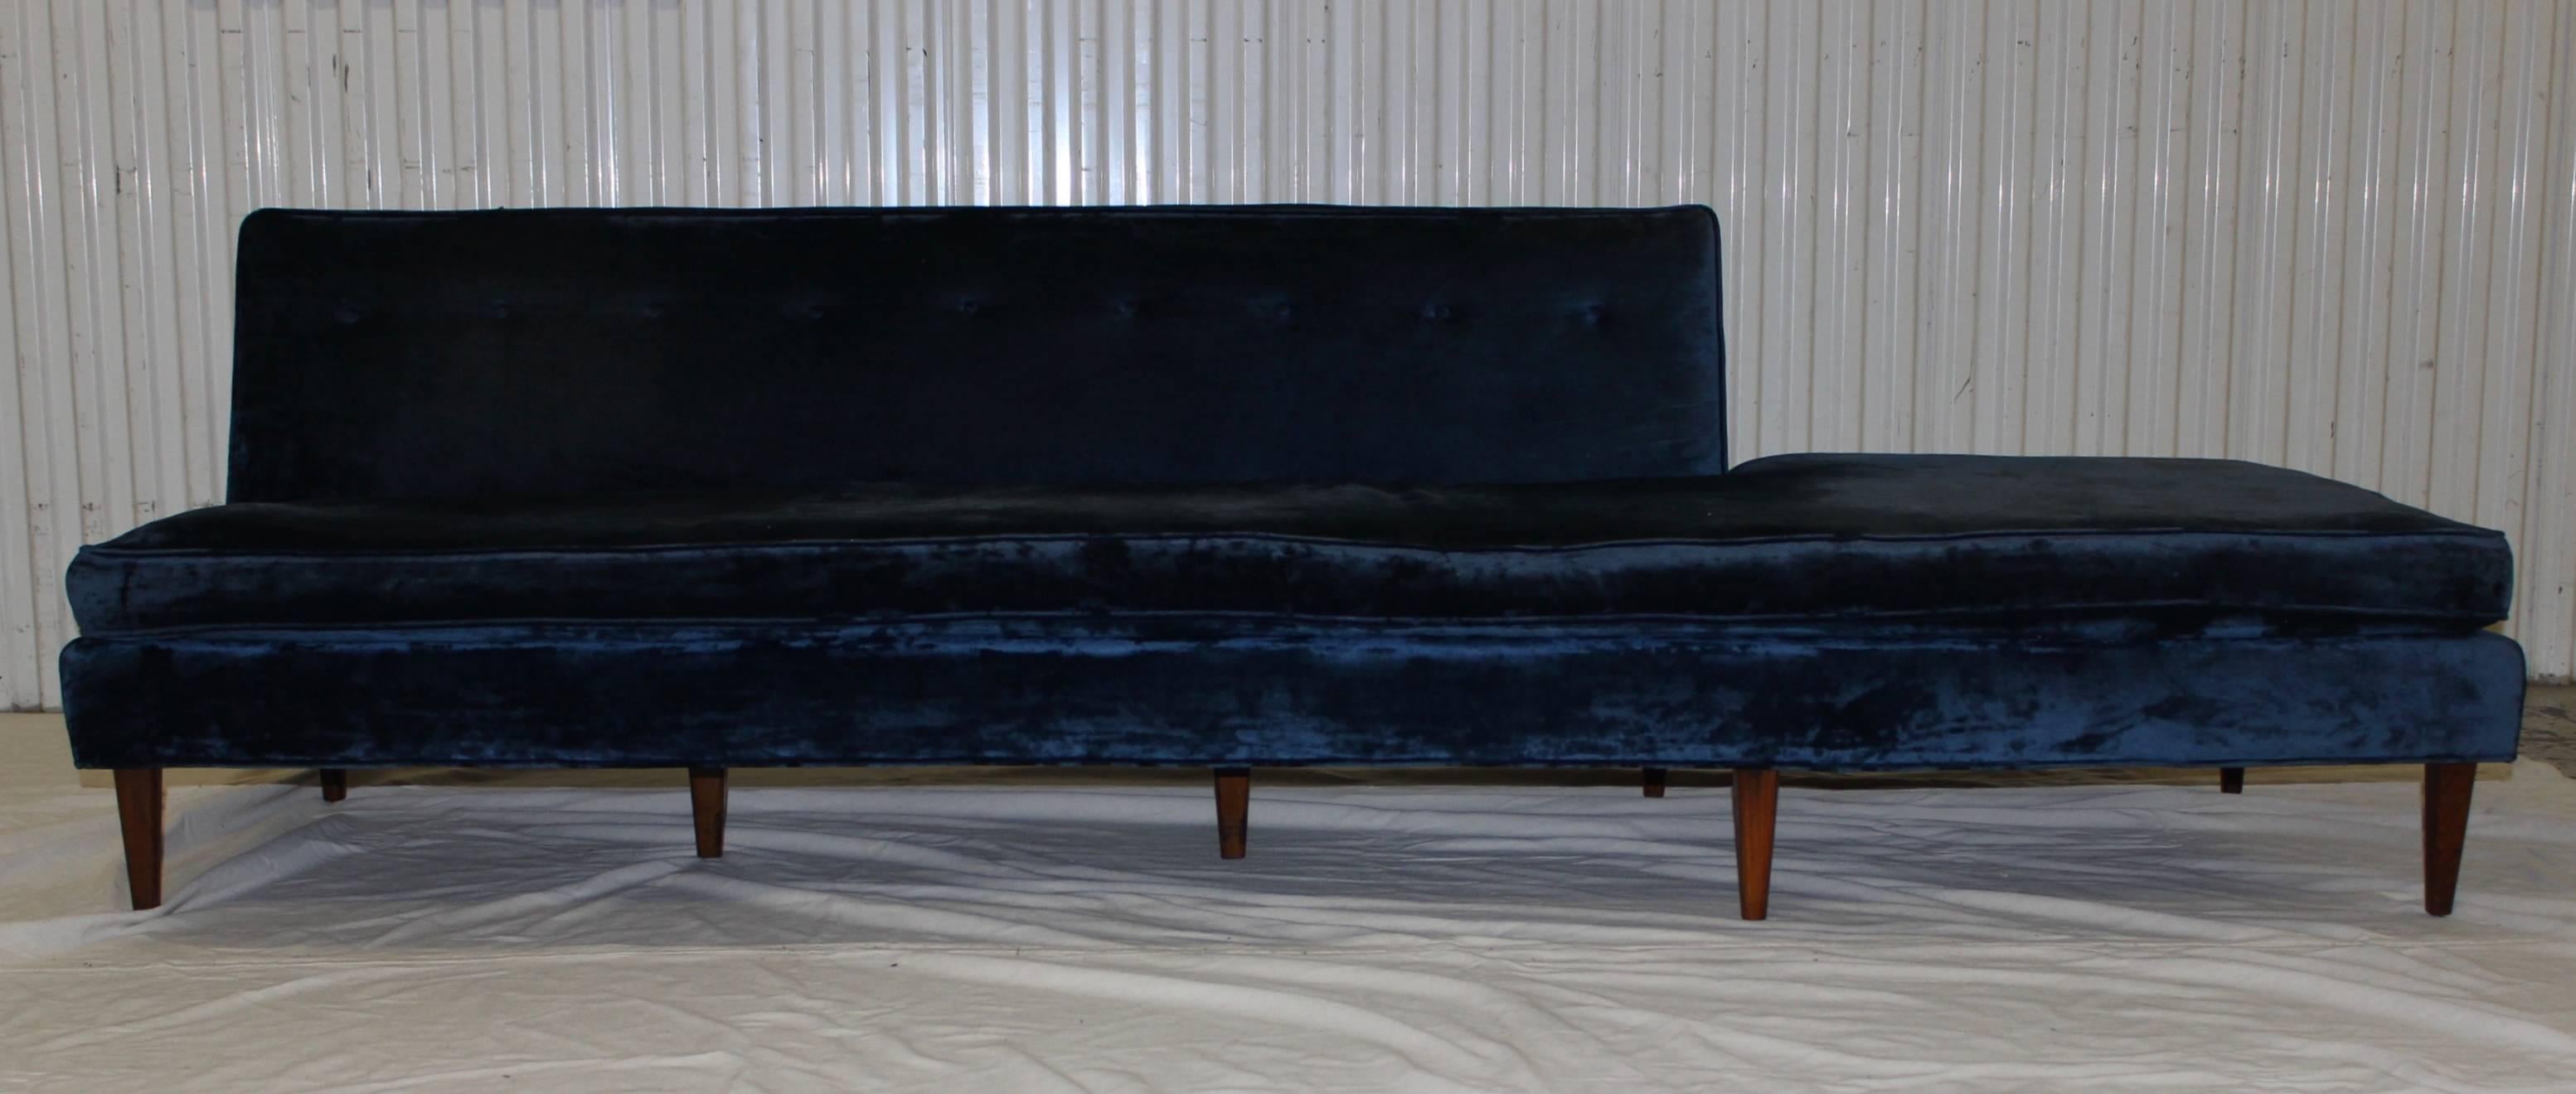 Stunning 1960s long armless modern sofa, in vintage velvet upholstery with solid walnut legs.

It needs new upholstery.